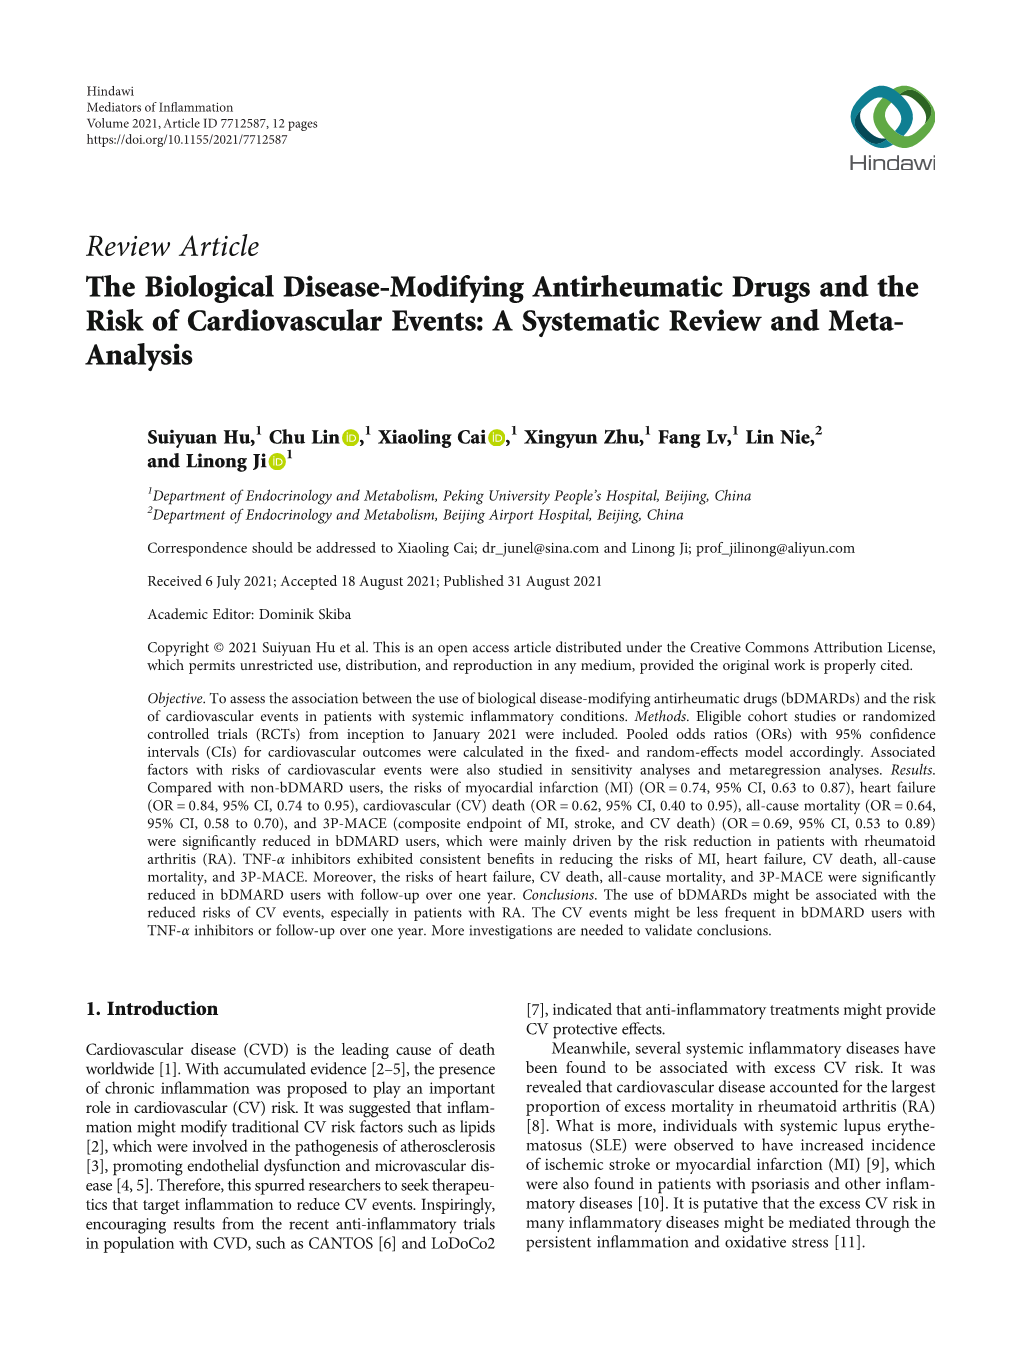 Review Article the Biological Disease-Modifying Antirheumatic Drugs and the Risk of Cardiovascular Events: a Systematic Review and Meta- Analysis